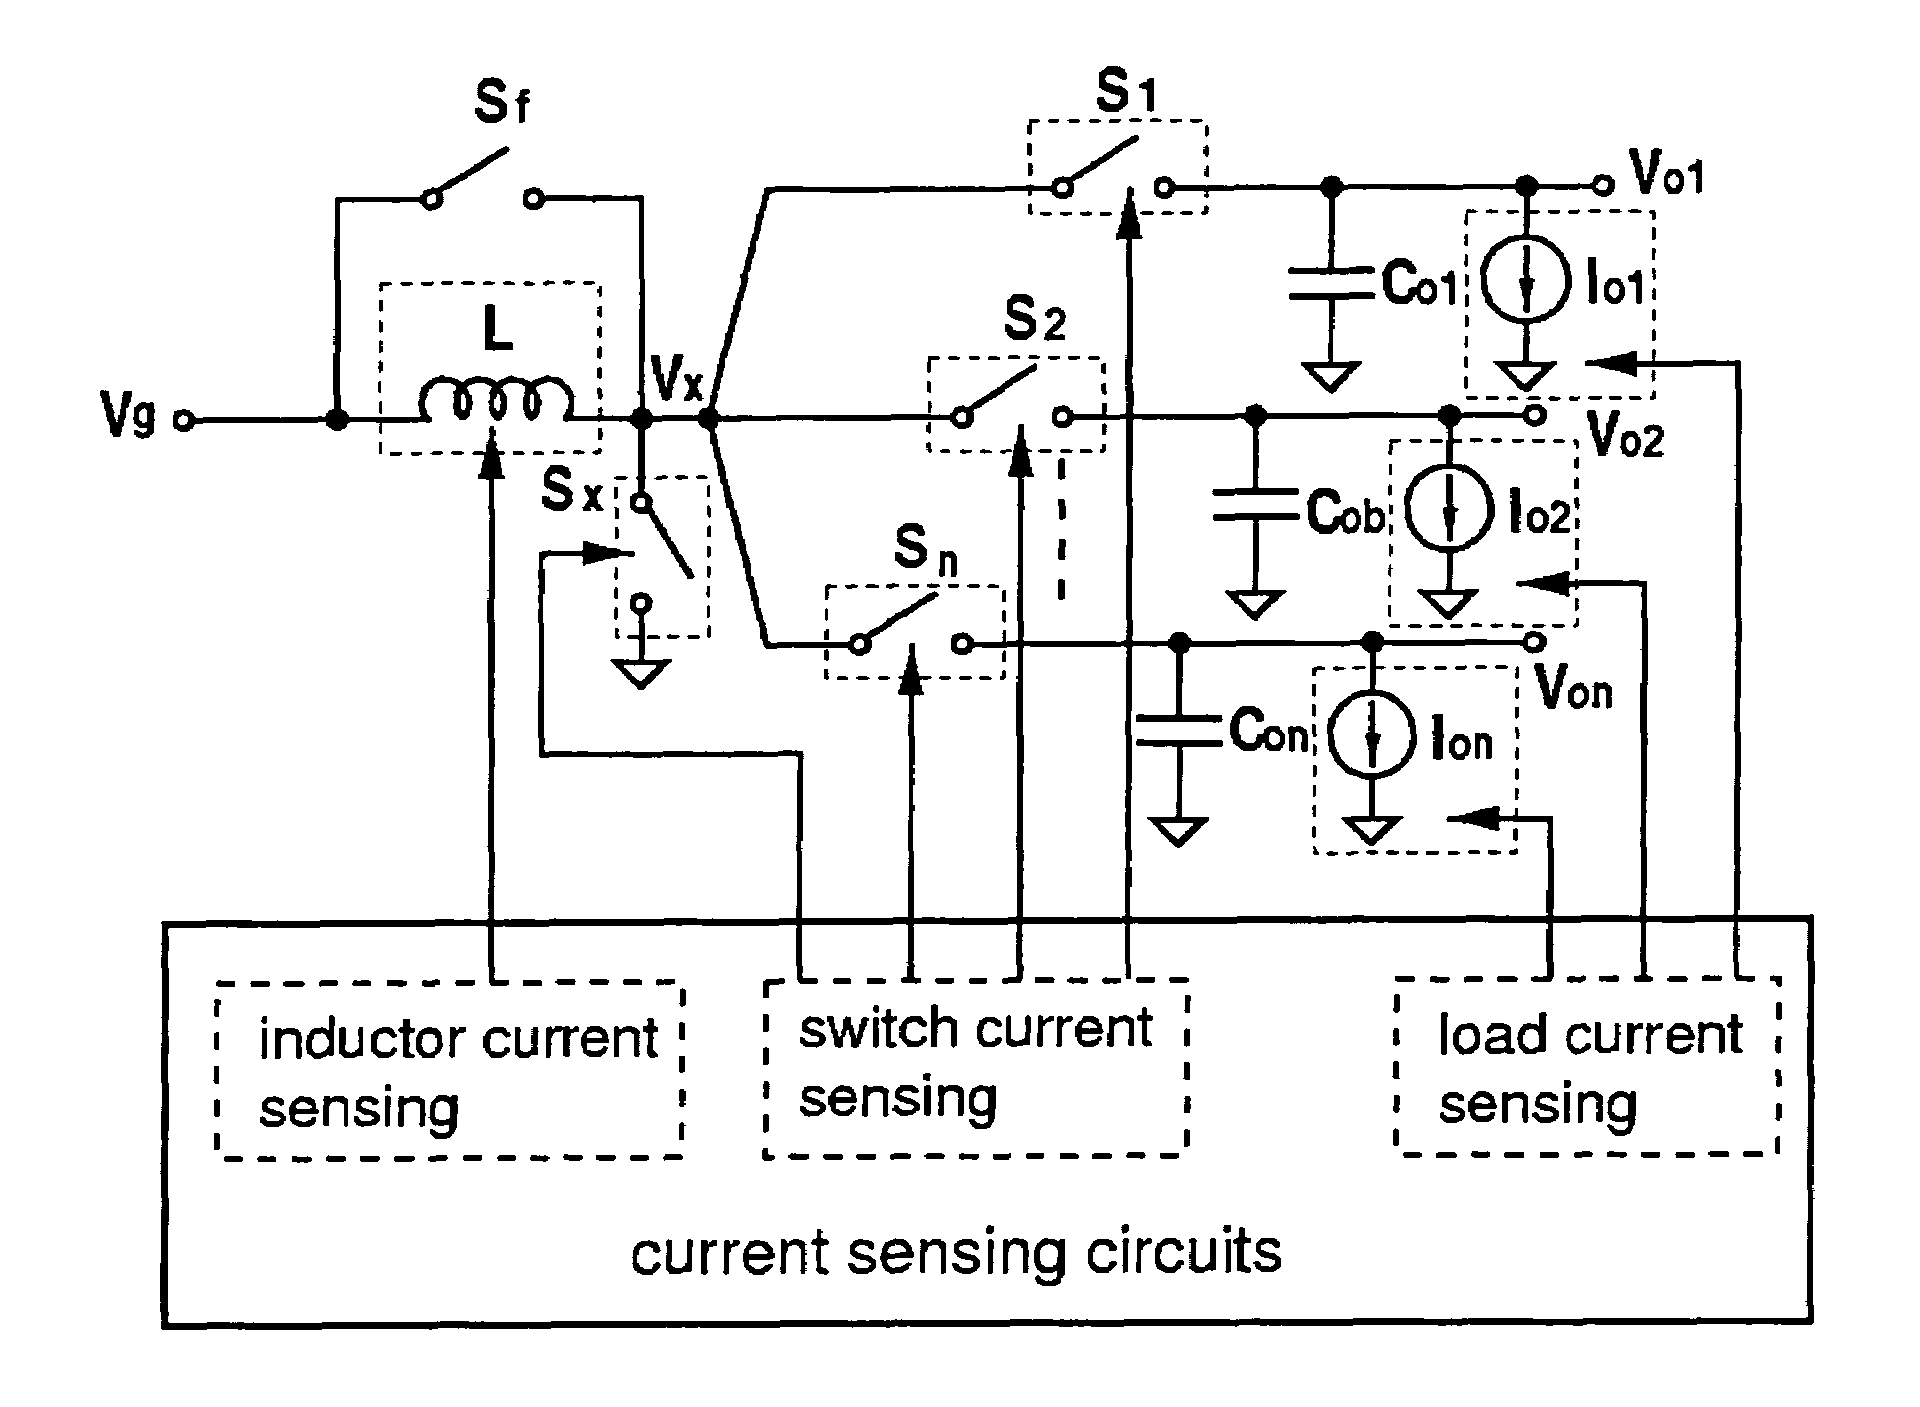 Single-inductor multiple-output switching converters in PCCM with freewheel switching